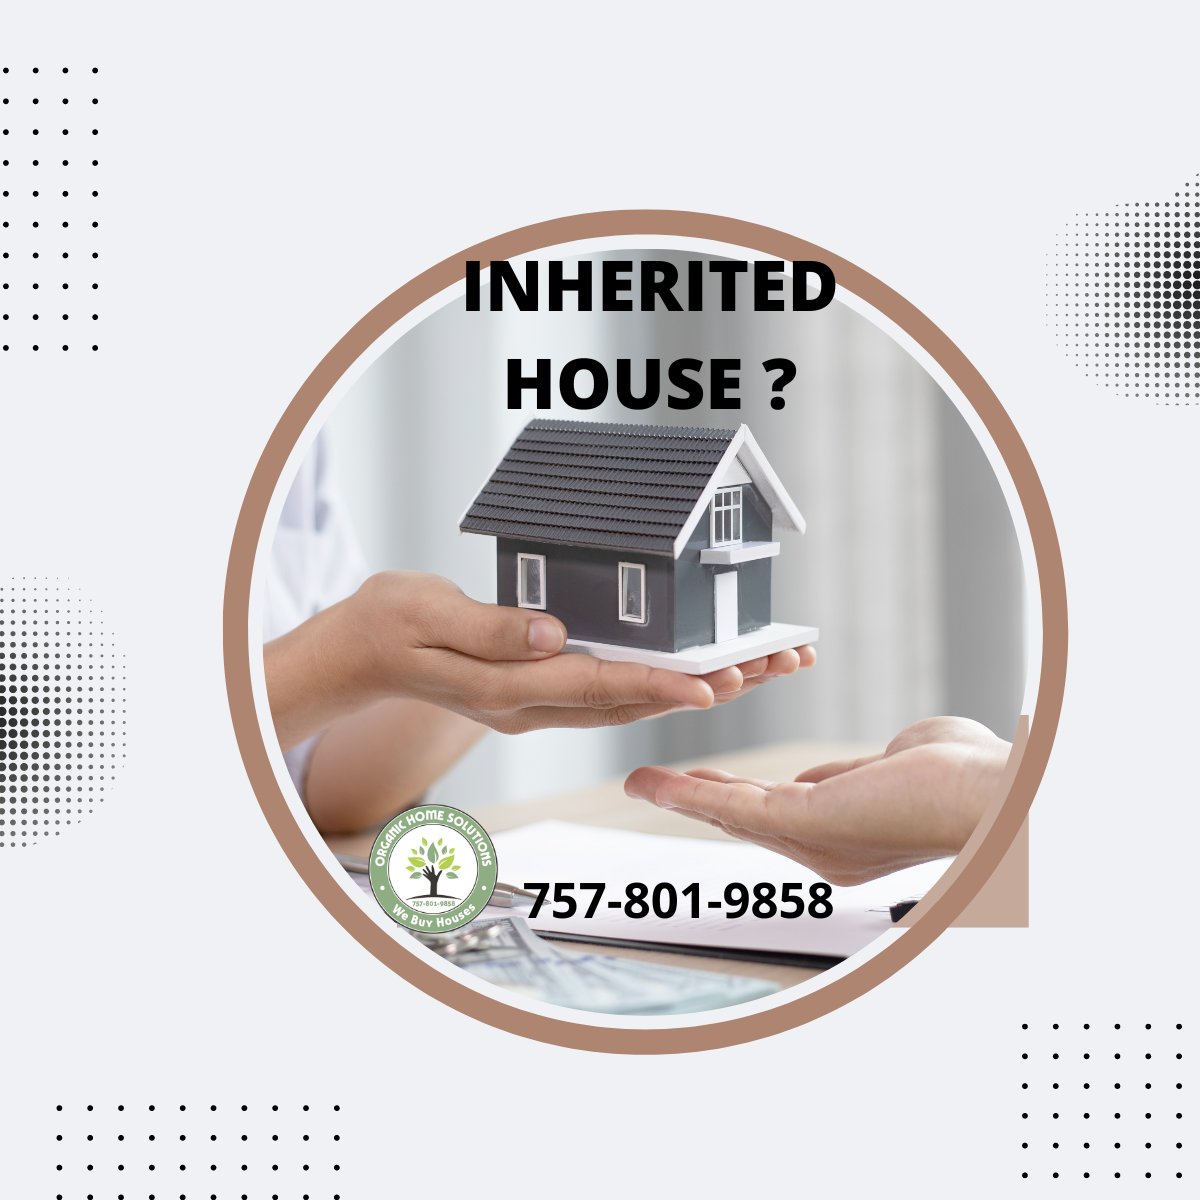 Inherited a house? Don't let the selling process overwhelm you. Consider the advantages of working with a cash buyer: quick sales, no repairs needed, and certainty of sale. Maximize your profits without the hassle. #RealEstate #CashBuyer #InheritedProperty #MaximizeProfits